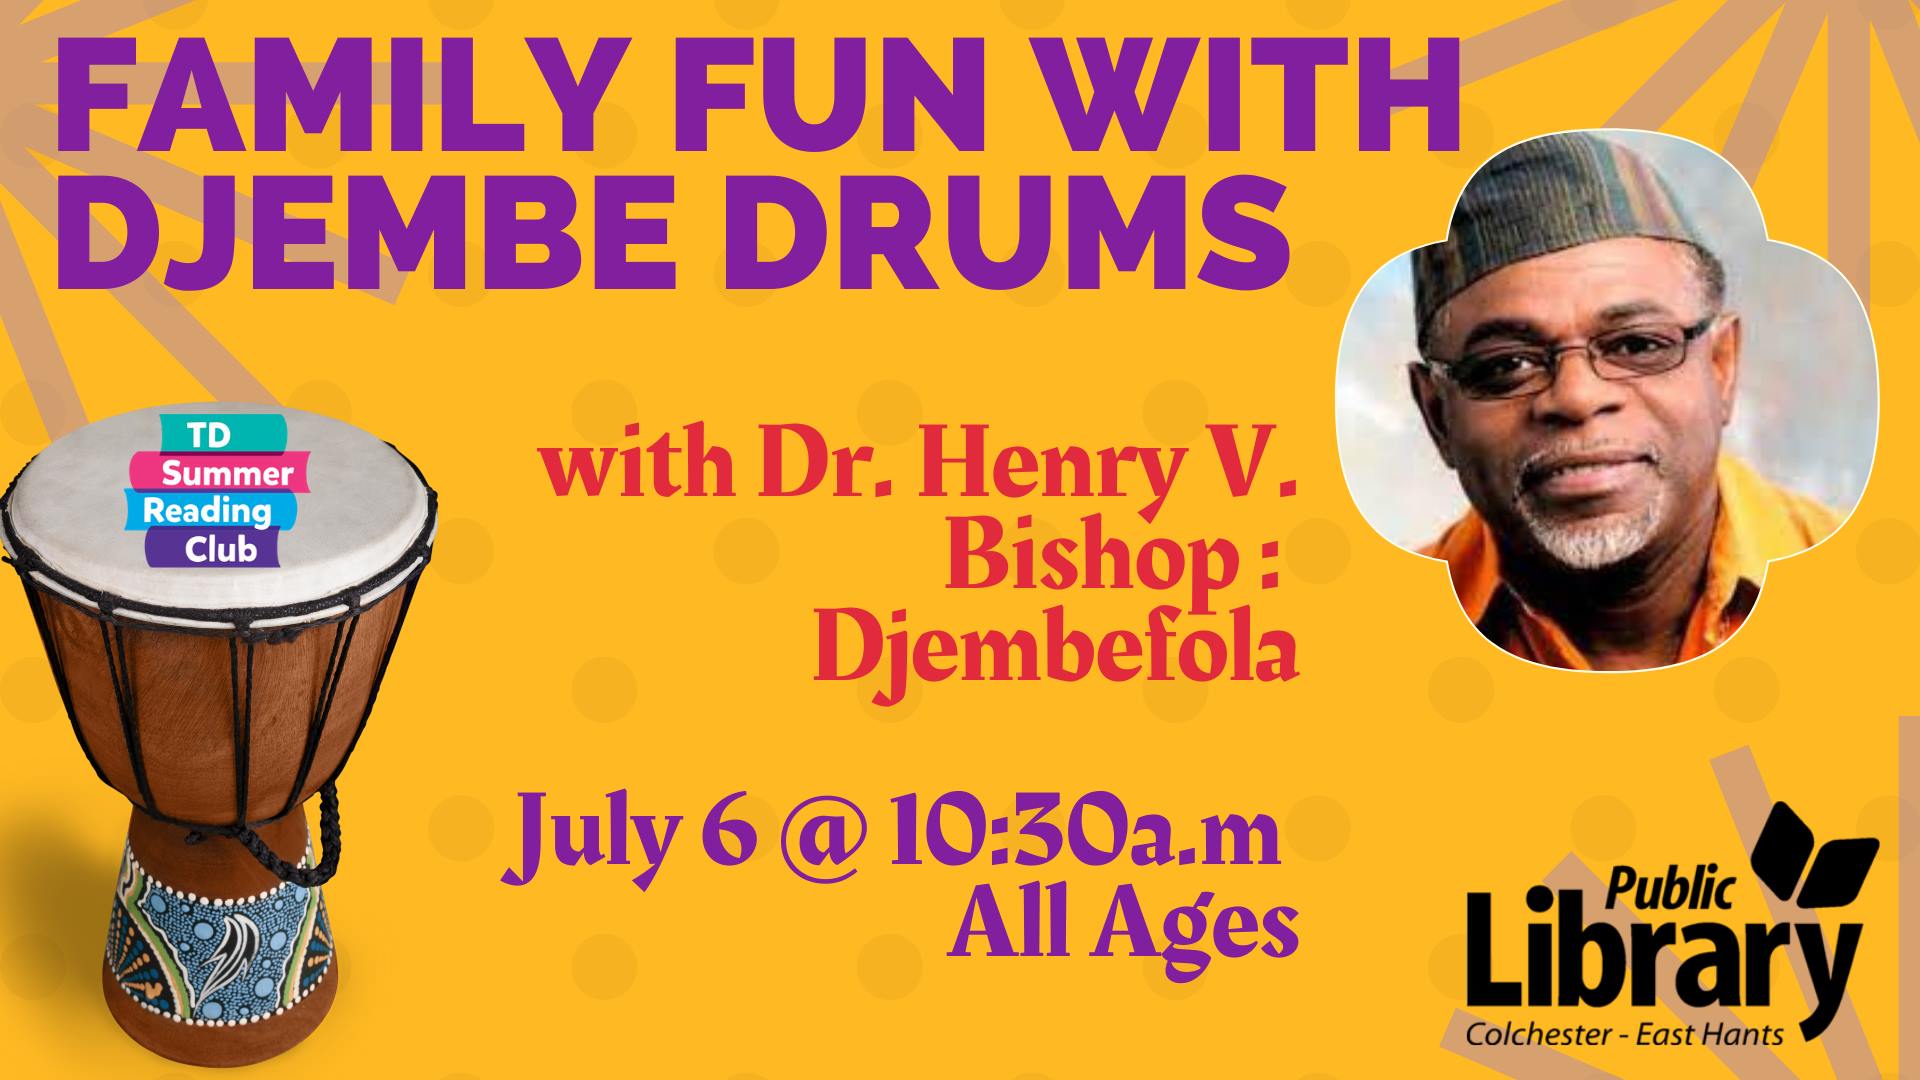 Family Fun with Djembe Drums